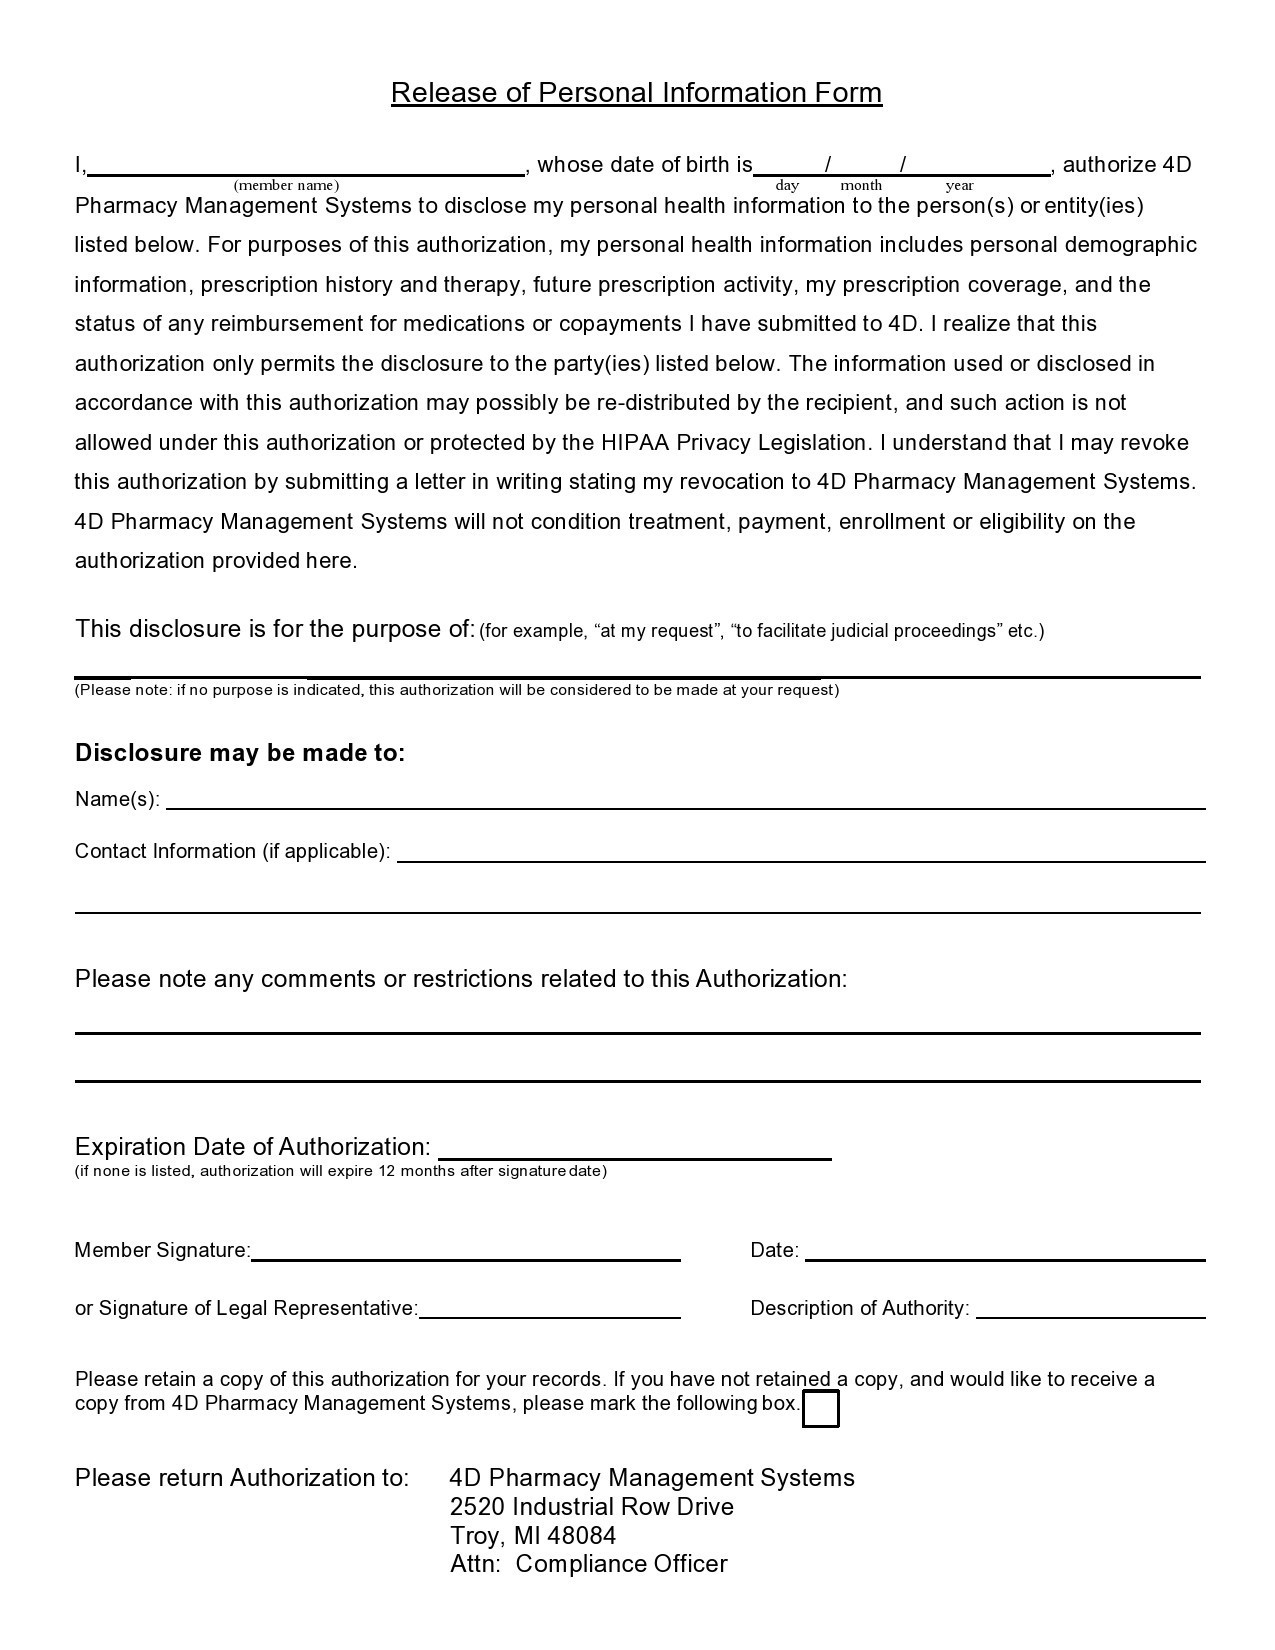 Free personal information form 21